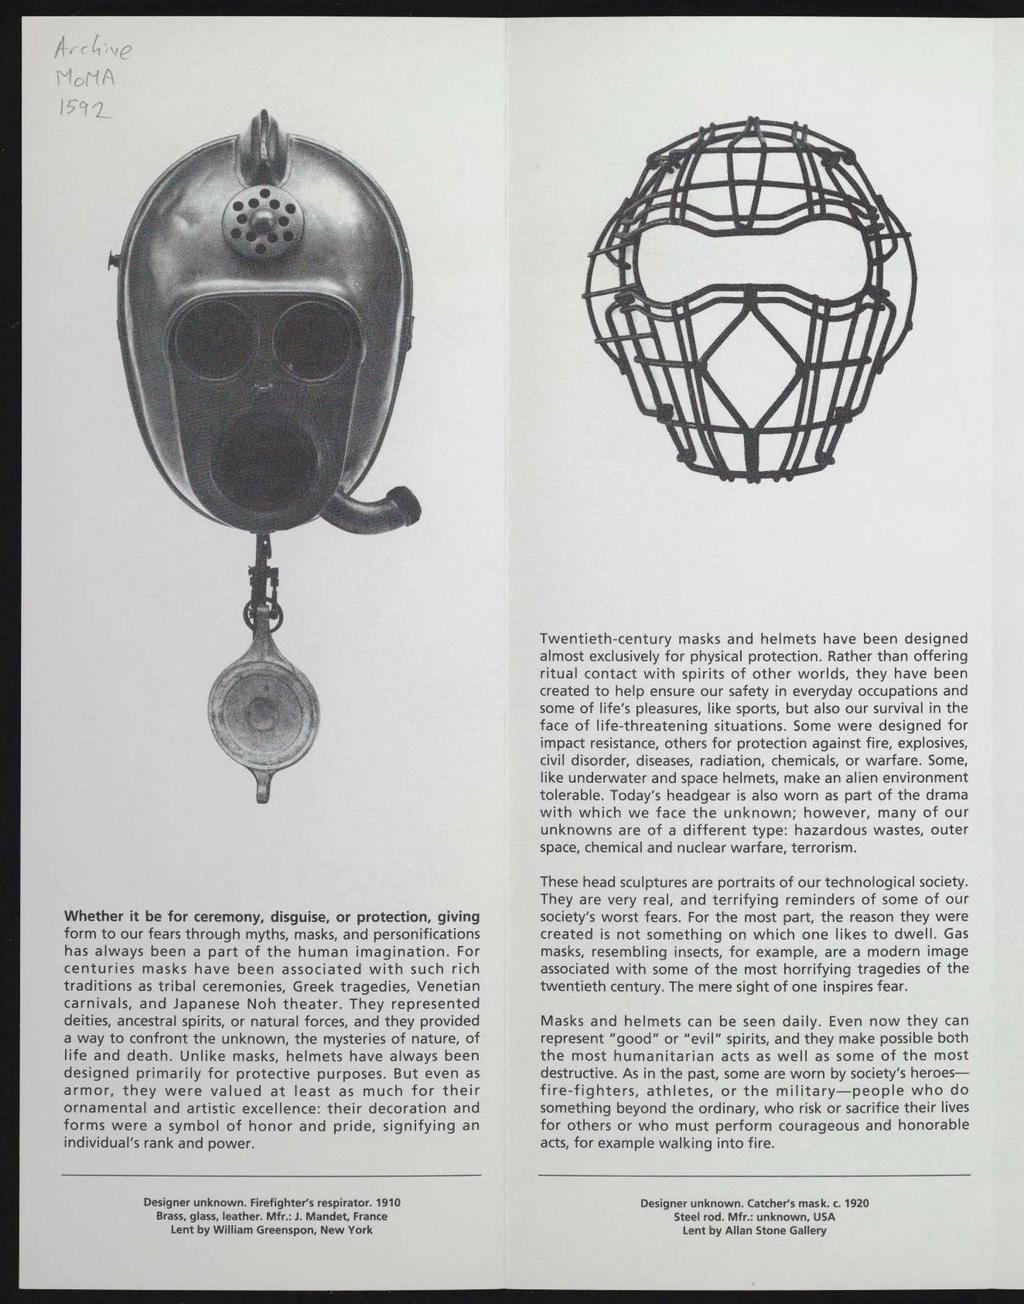 HoMA Twentieth-century masks and helmets have been designed almost exclusively for physical protection.